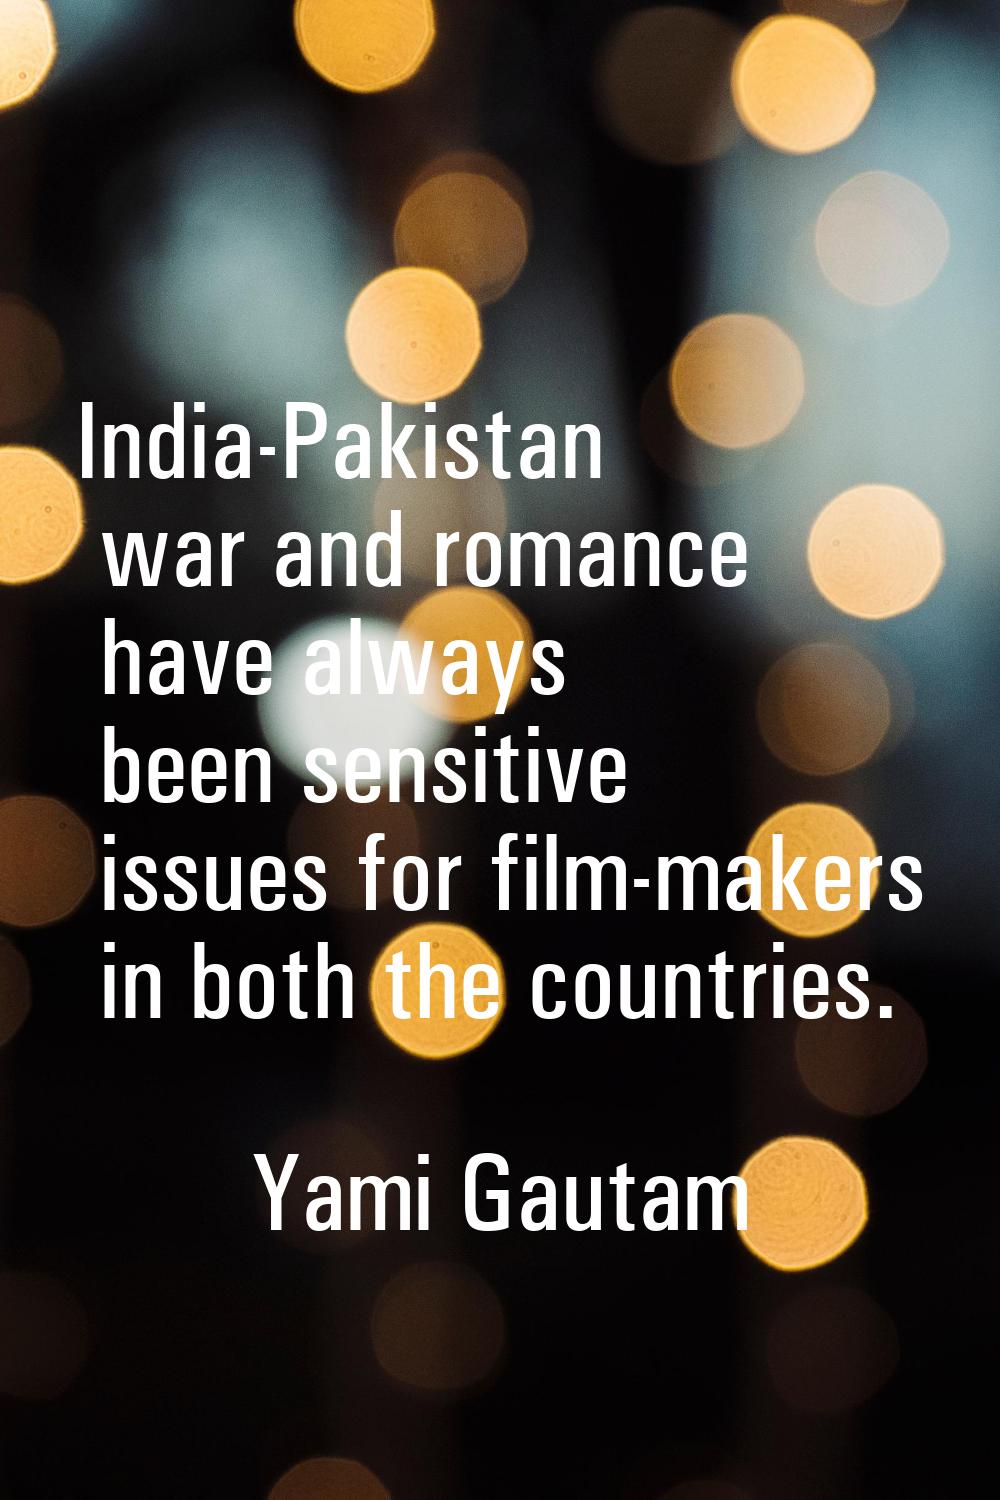 India-Pakistan war and romance have always been sensitive issues for film-makers in both the countr